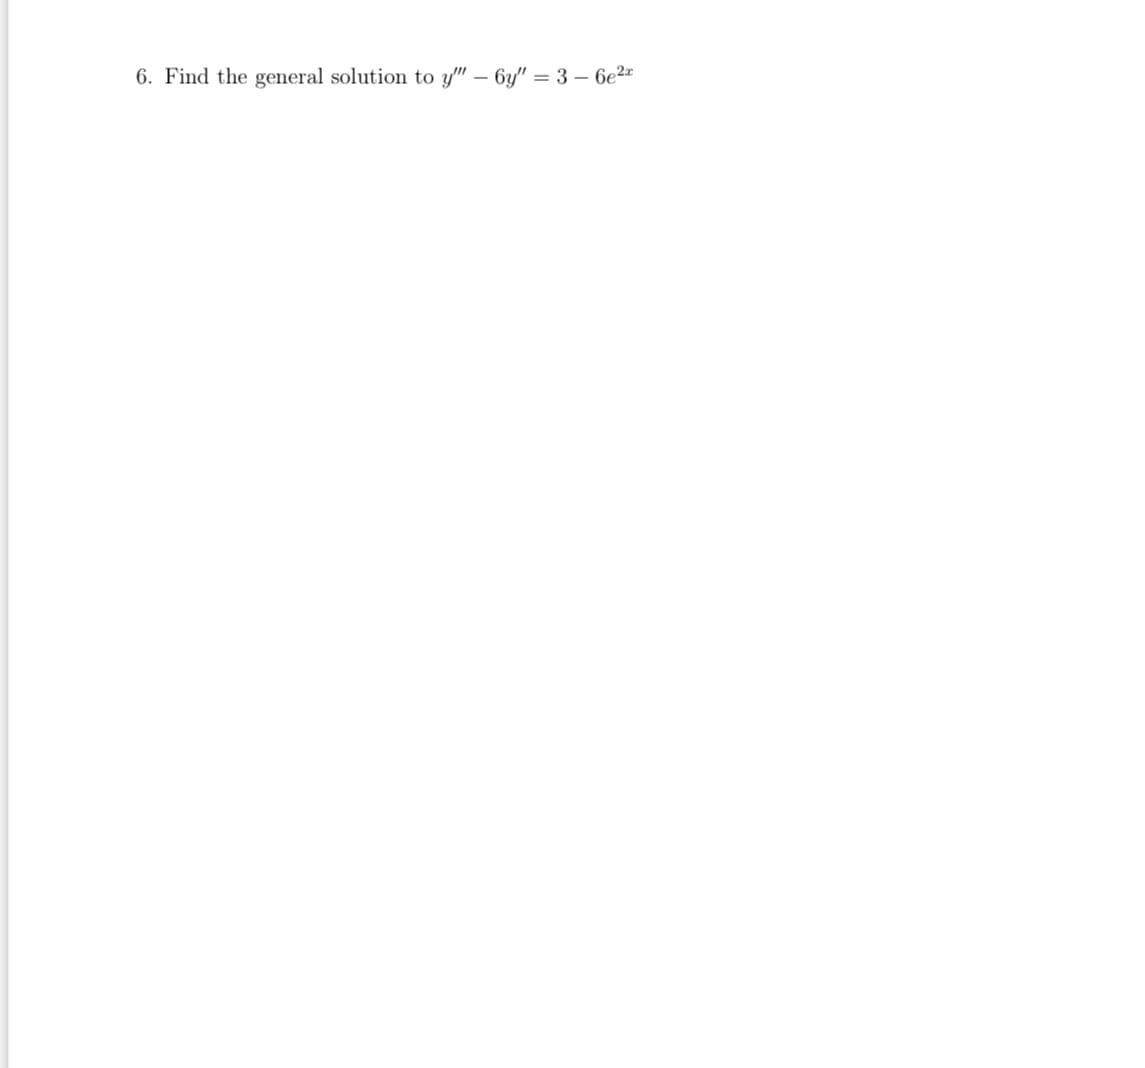 6. Find the general solution to y" – 6y" = 3 – 6e2*
